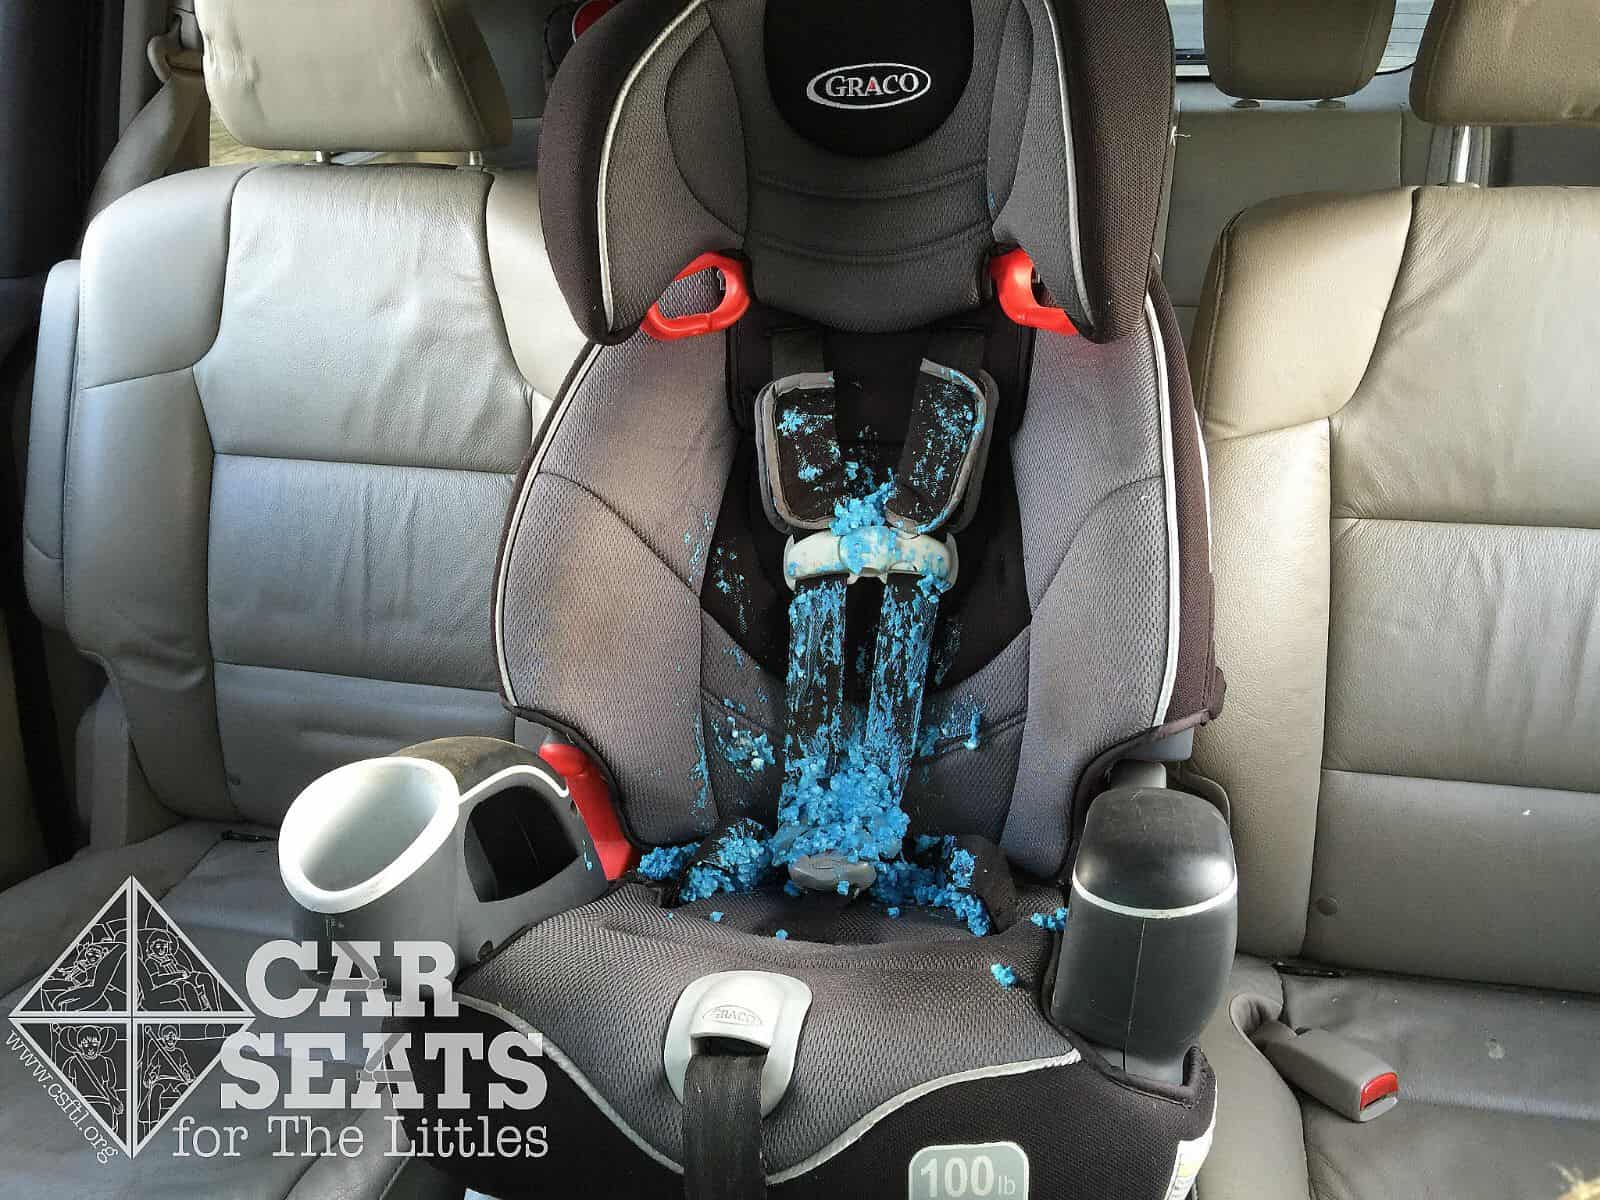 Clek Car Seat Cleaning Free, Where Can I Get A Free Car Seat For My Baby